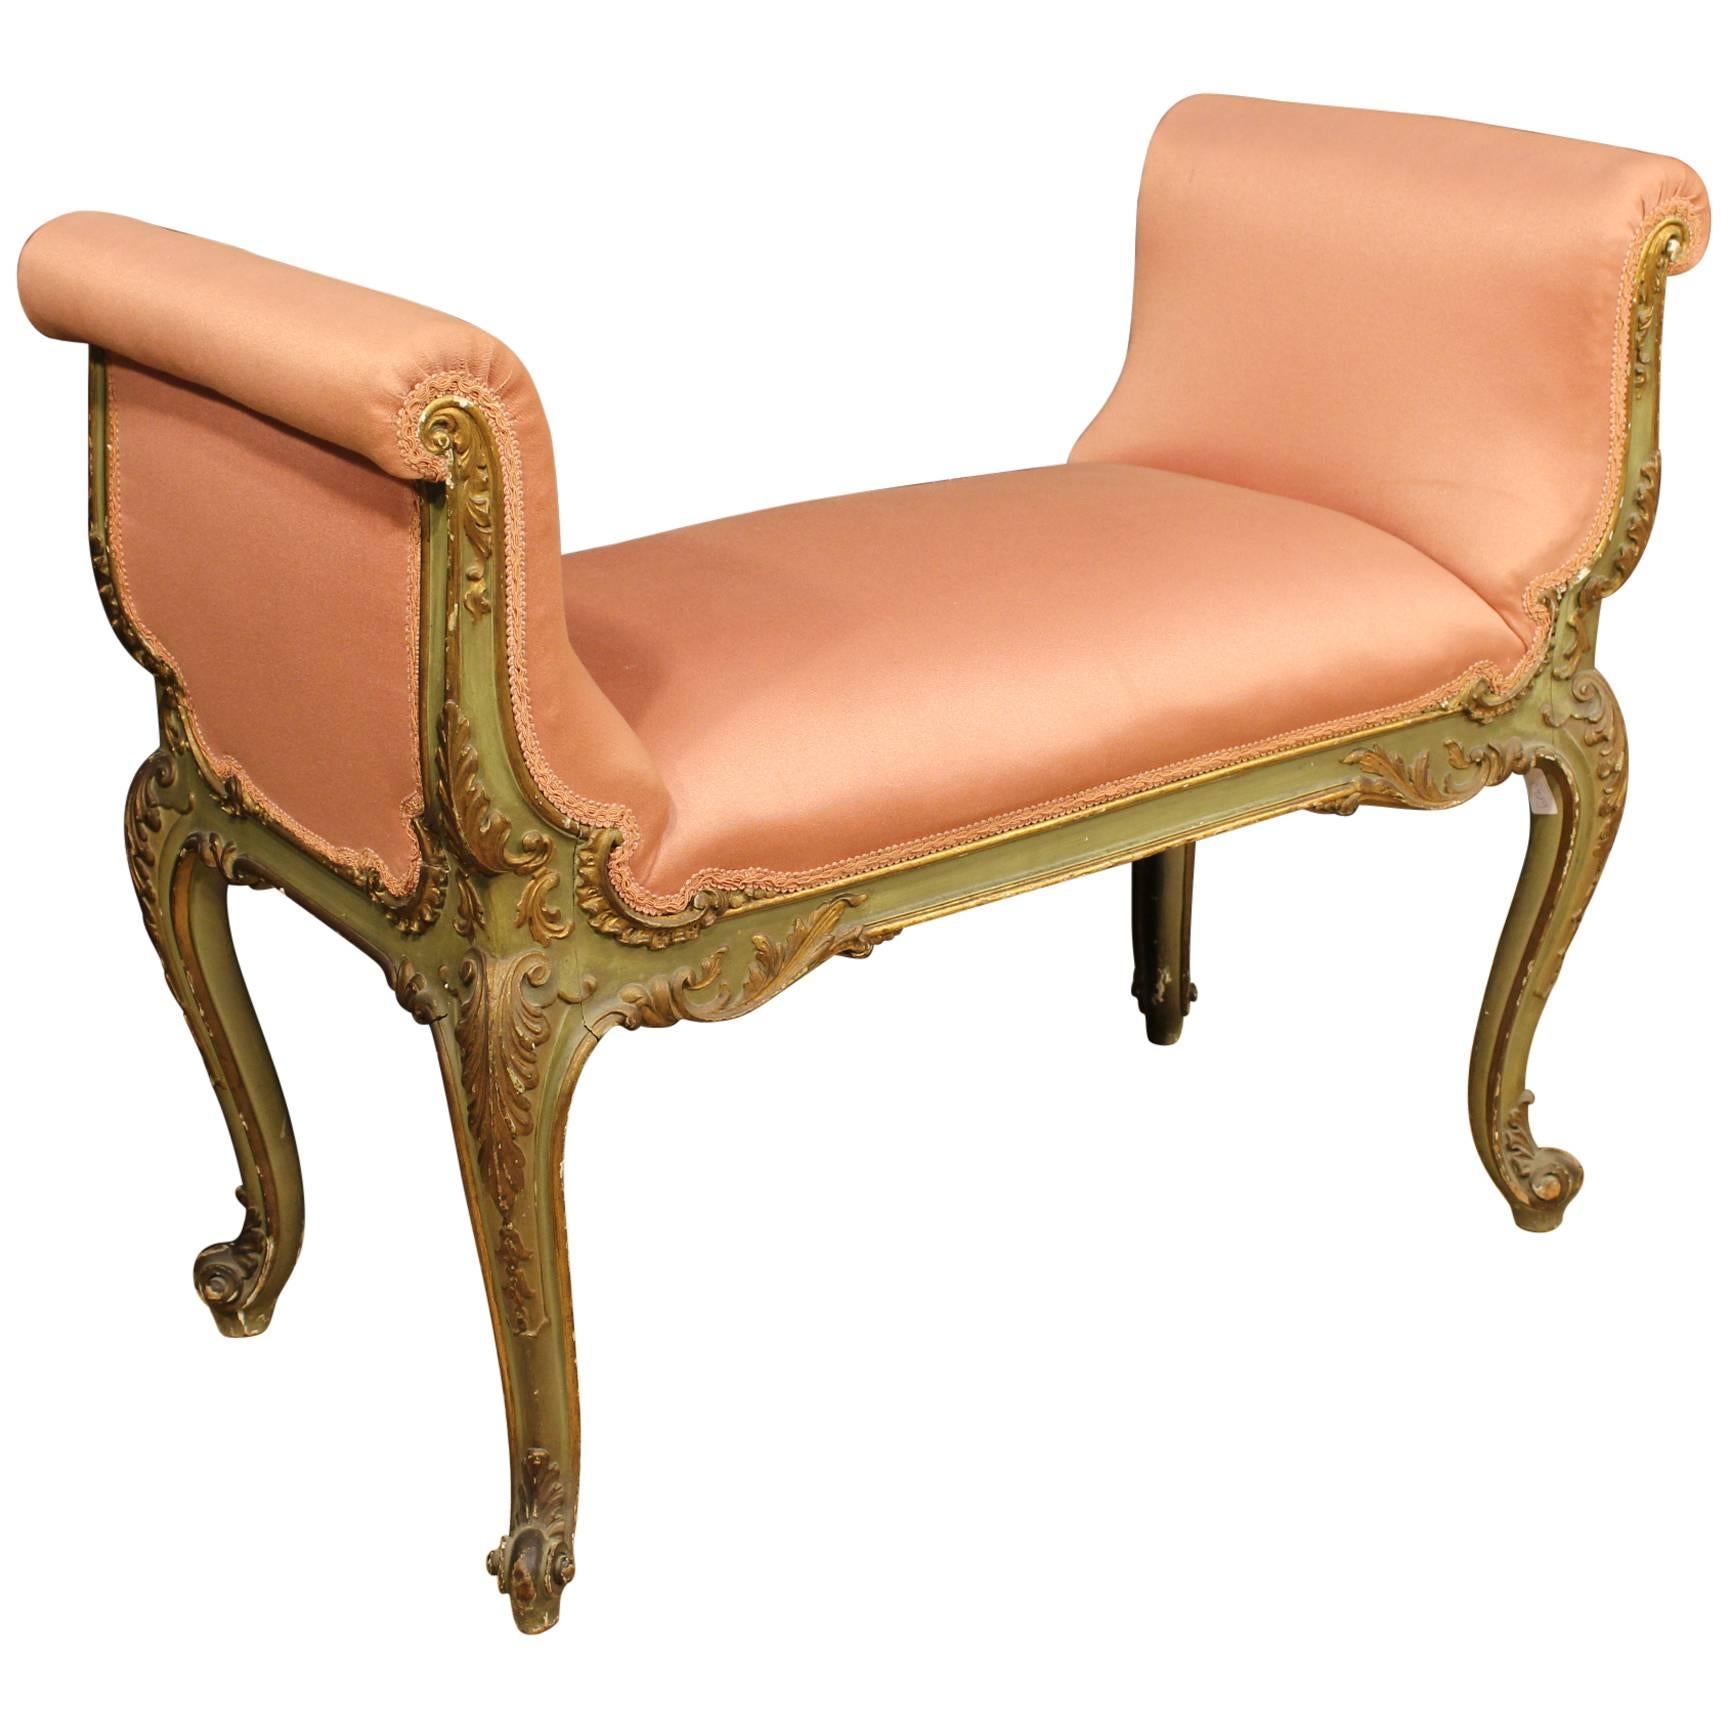 20th Century Venetian Lacquered and Gilt Bench